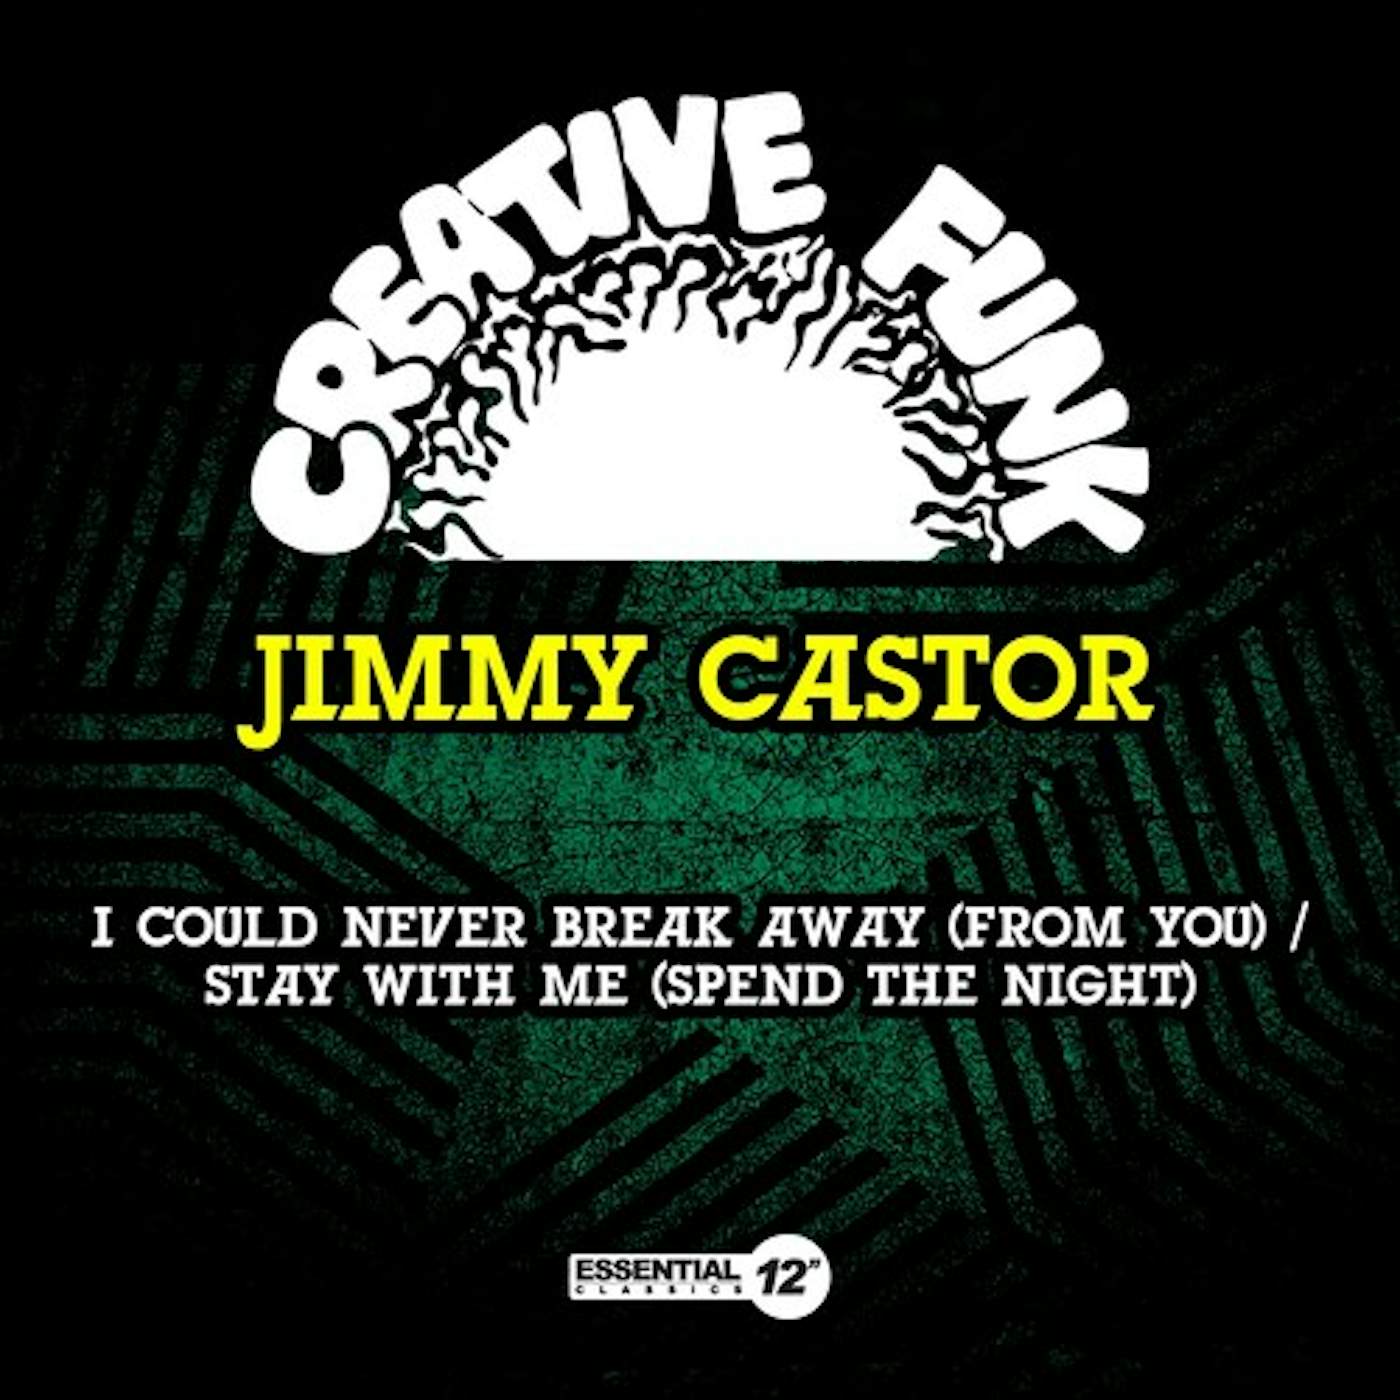 Jimmy Castor COULD NEVER BREAK AWAY (FROM YOU) / STAY WITH ME CD